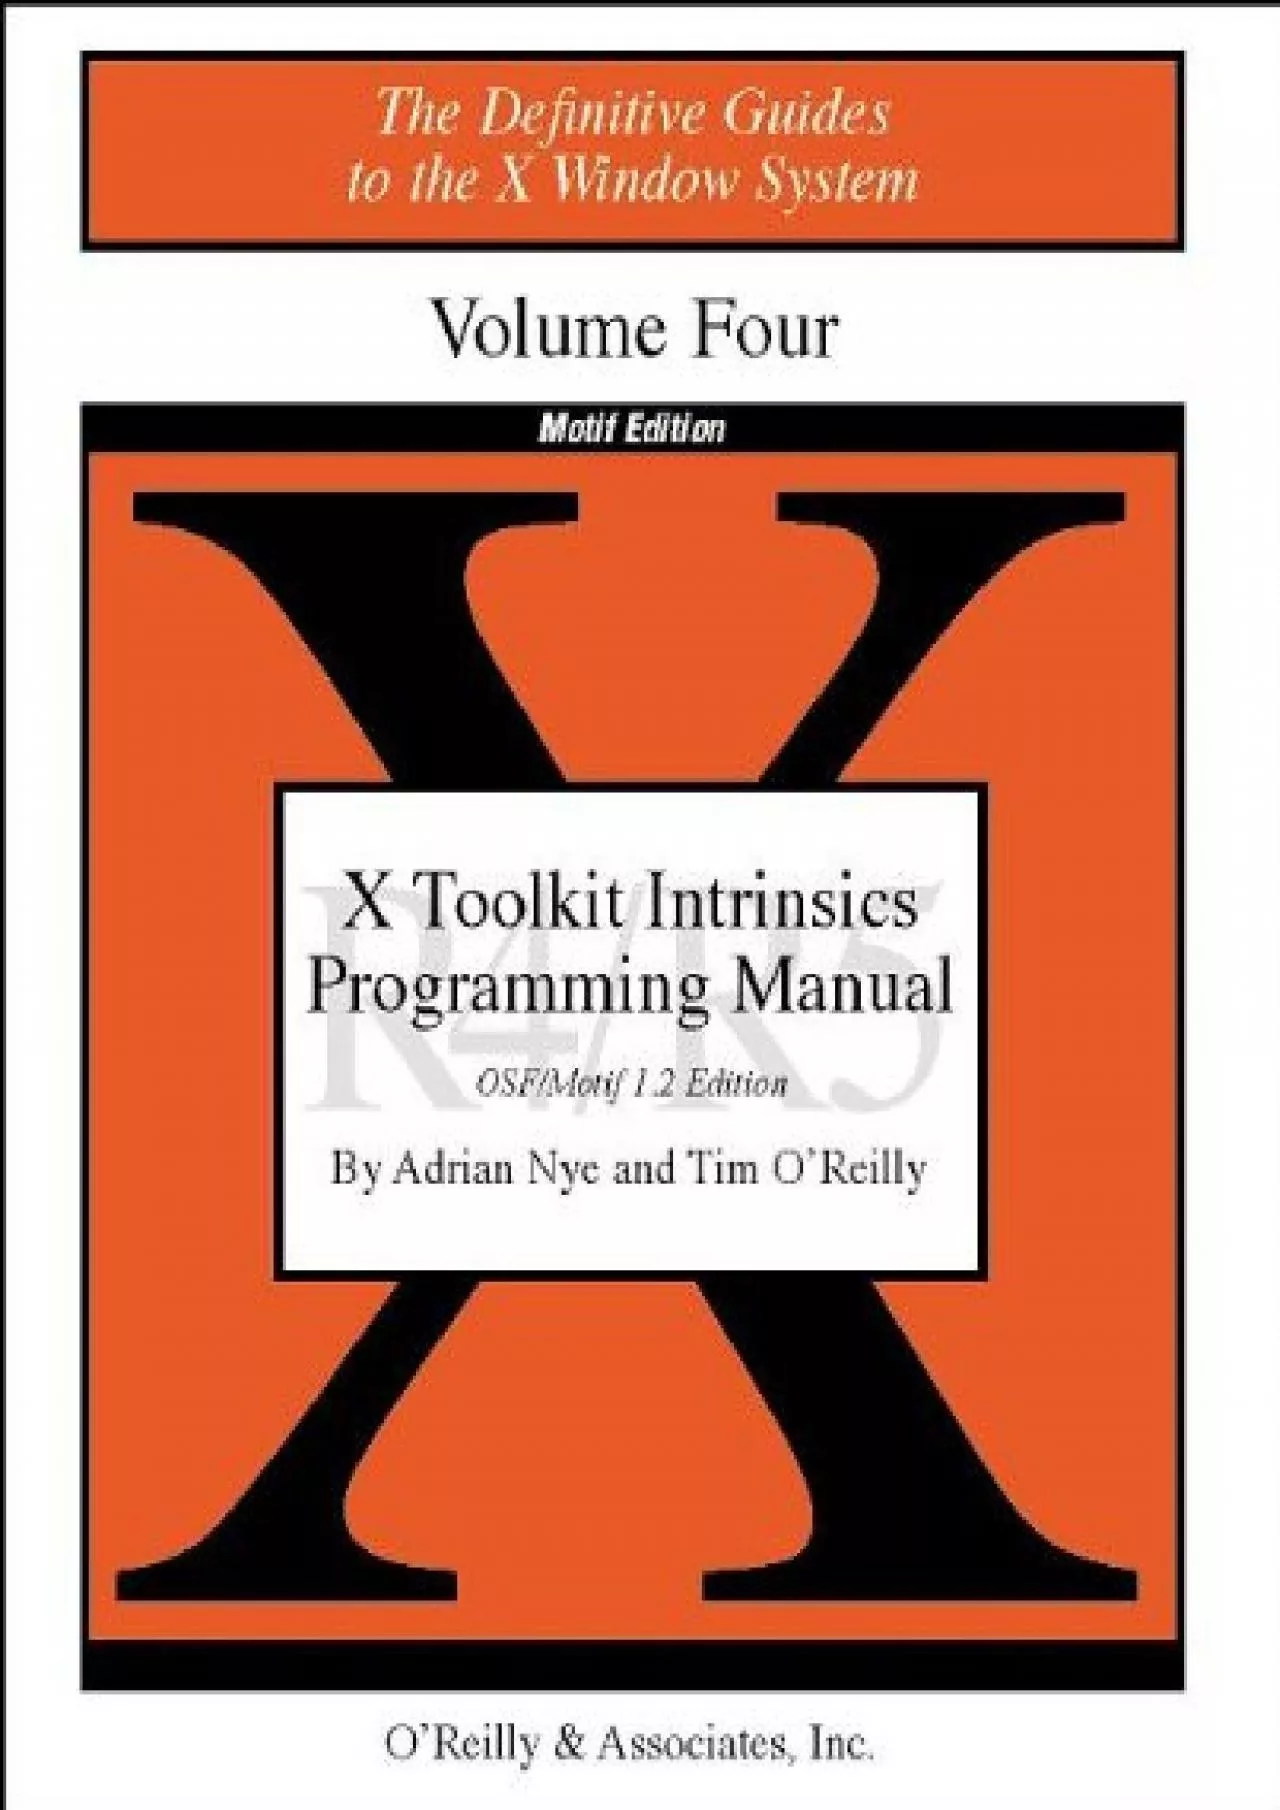 [READING BOOK]-X Toolkit Intrinsics Prog Vol 4M: Motif Edition (Definitive Guides to the